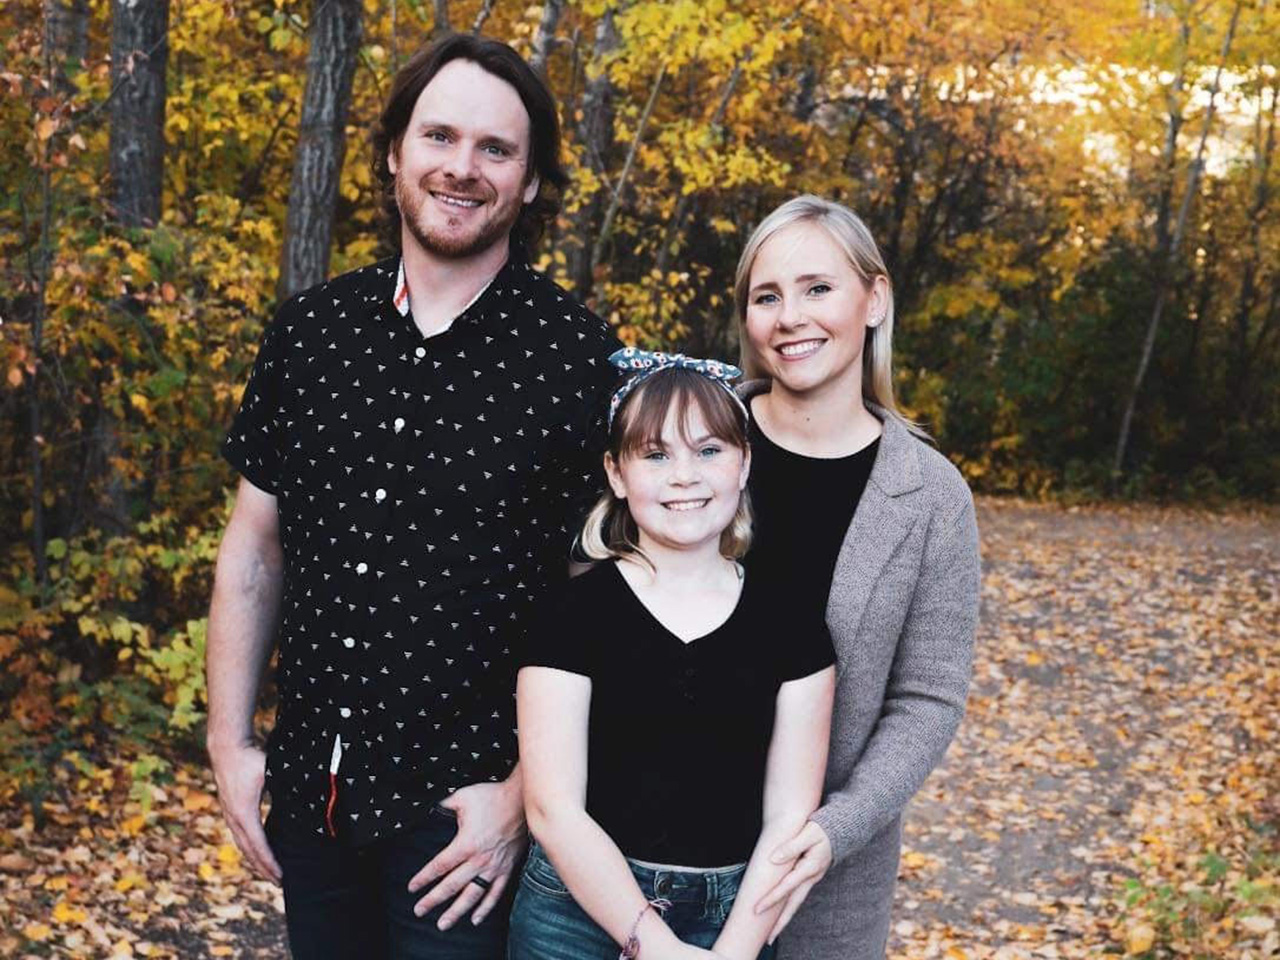 A family of three: from left, a man with brown hair, a beard and black short-sleeved button-down, a young girl wearing a black T-shirt and a woman with blonde hair and a grey cardigan, all standing in a wooded area